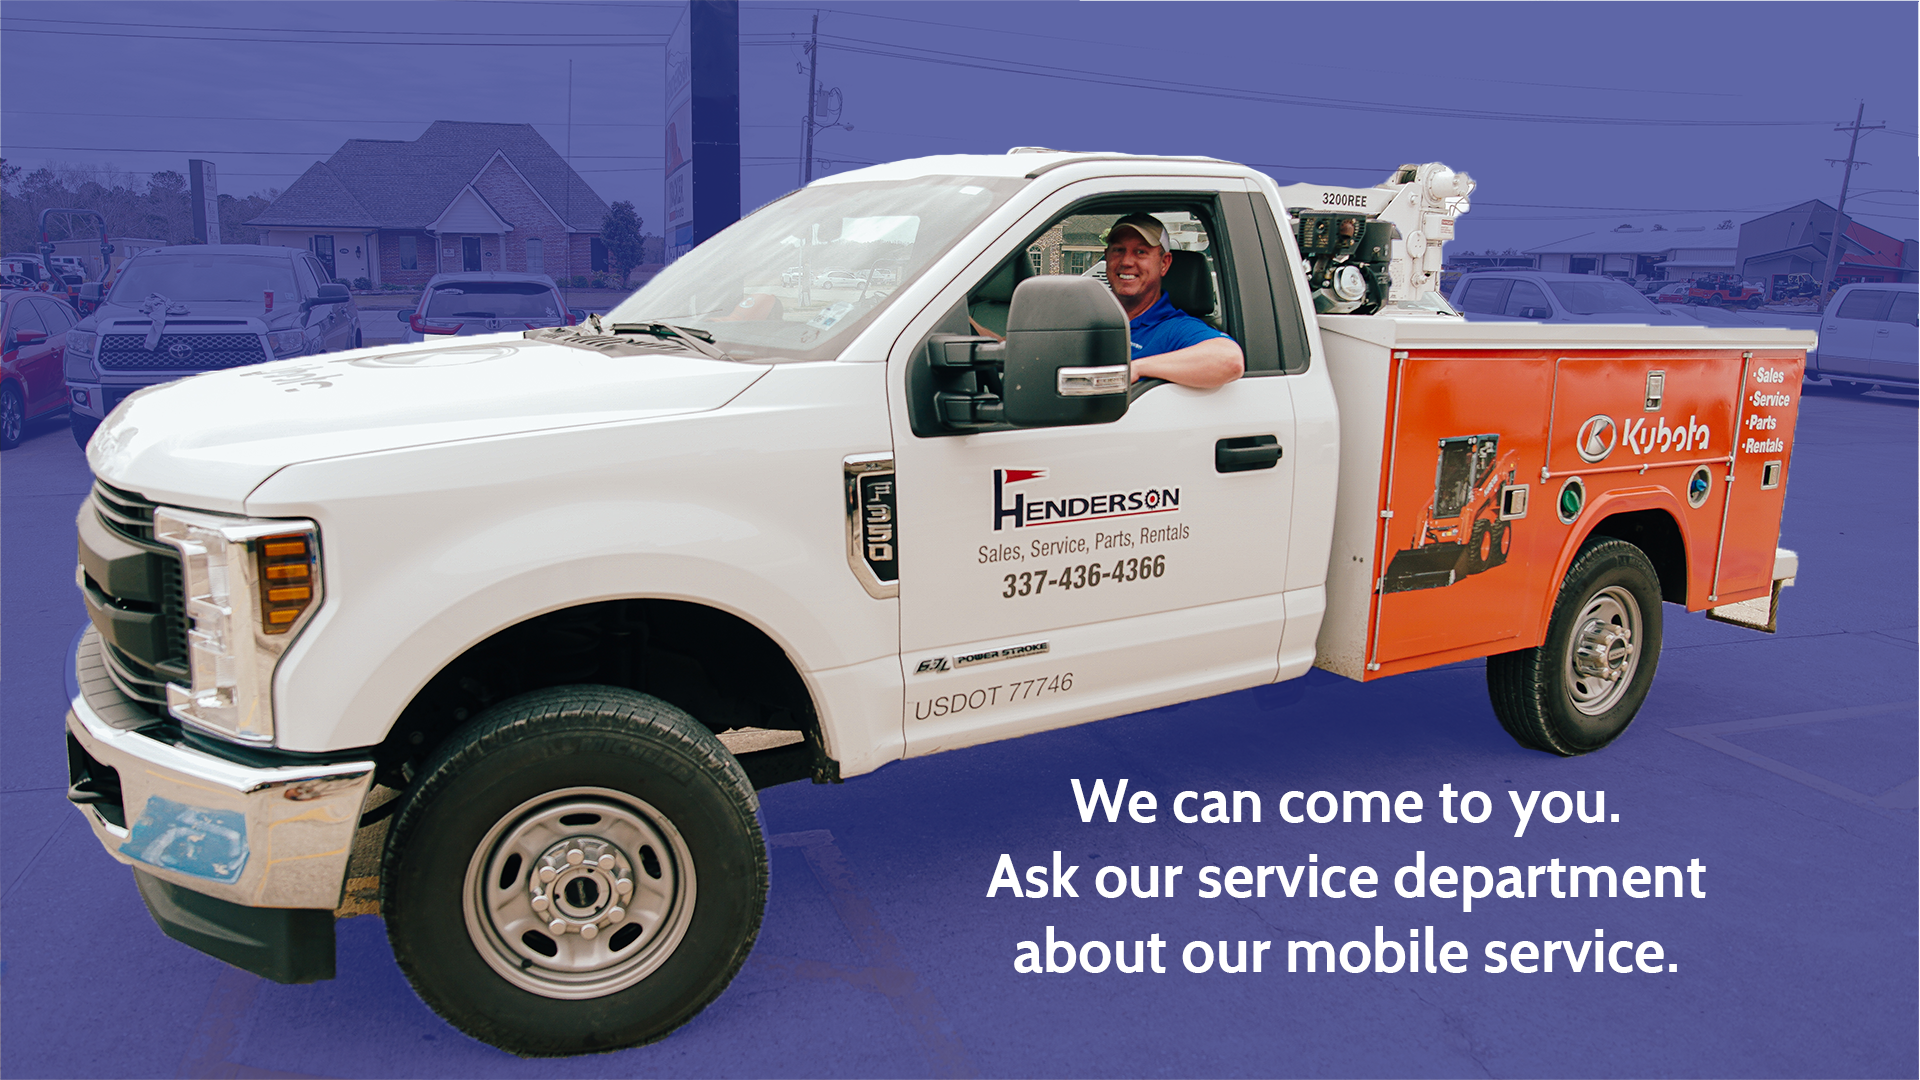 Mobile Service Truck. Ask for how we can help you.